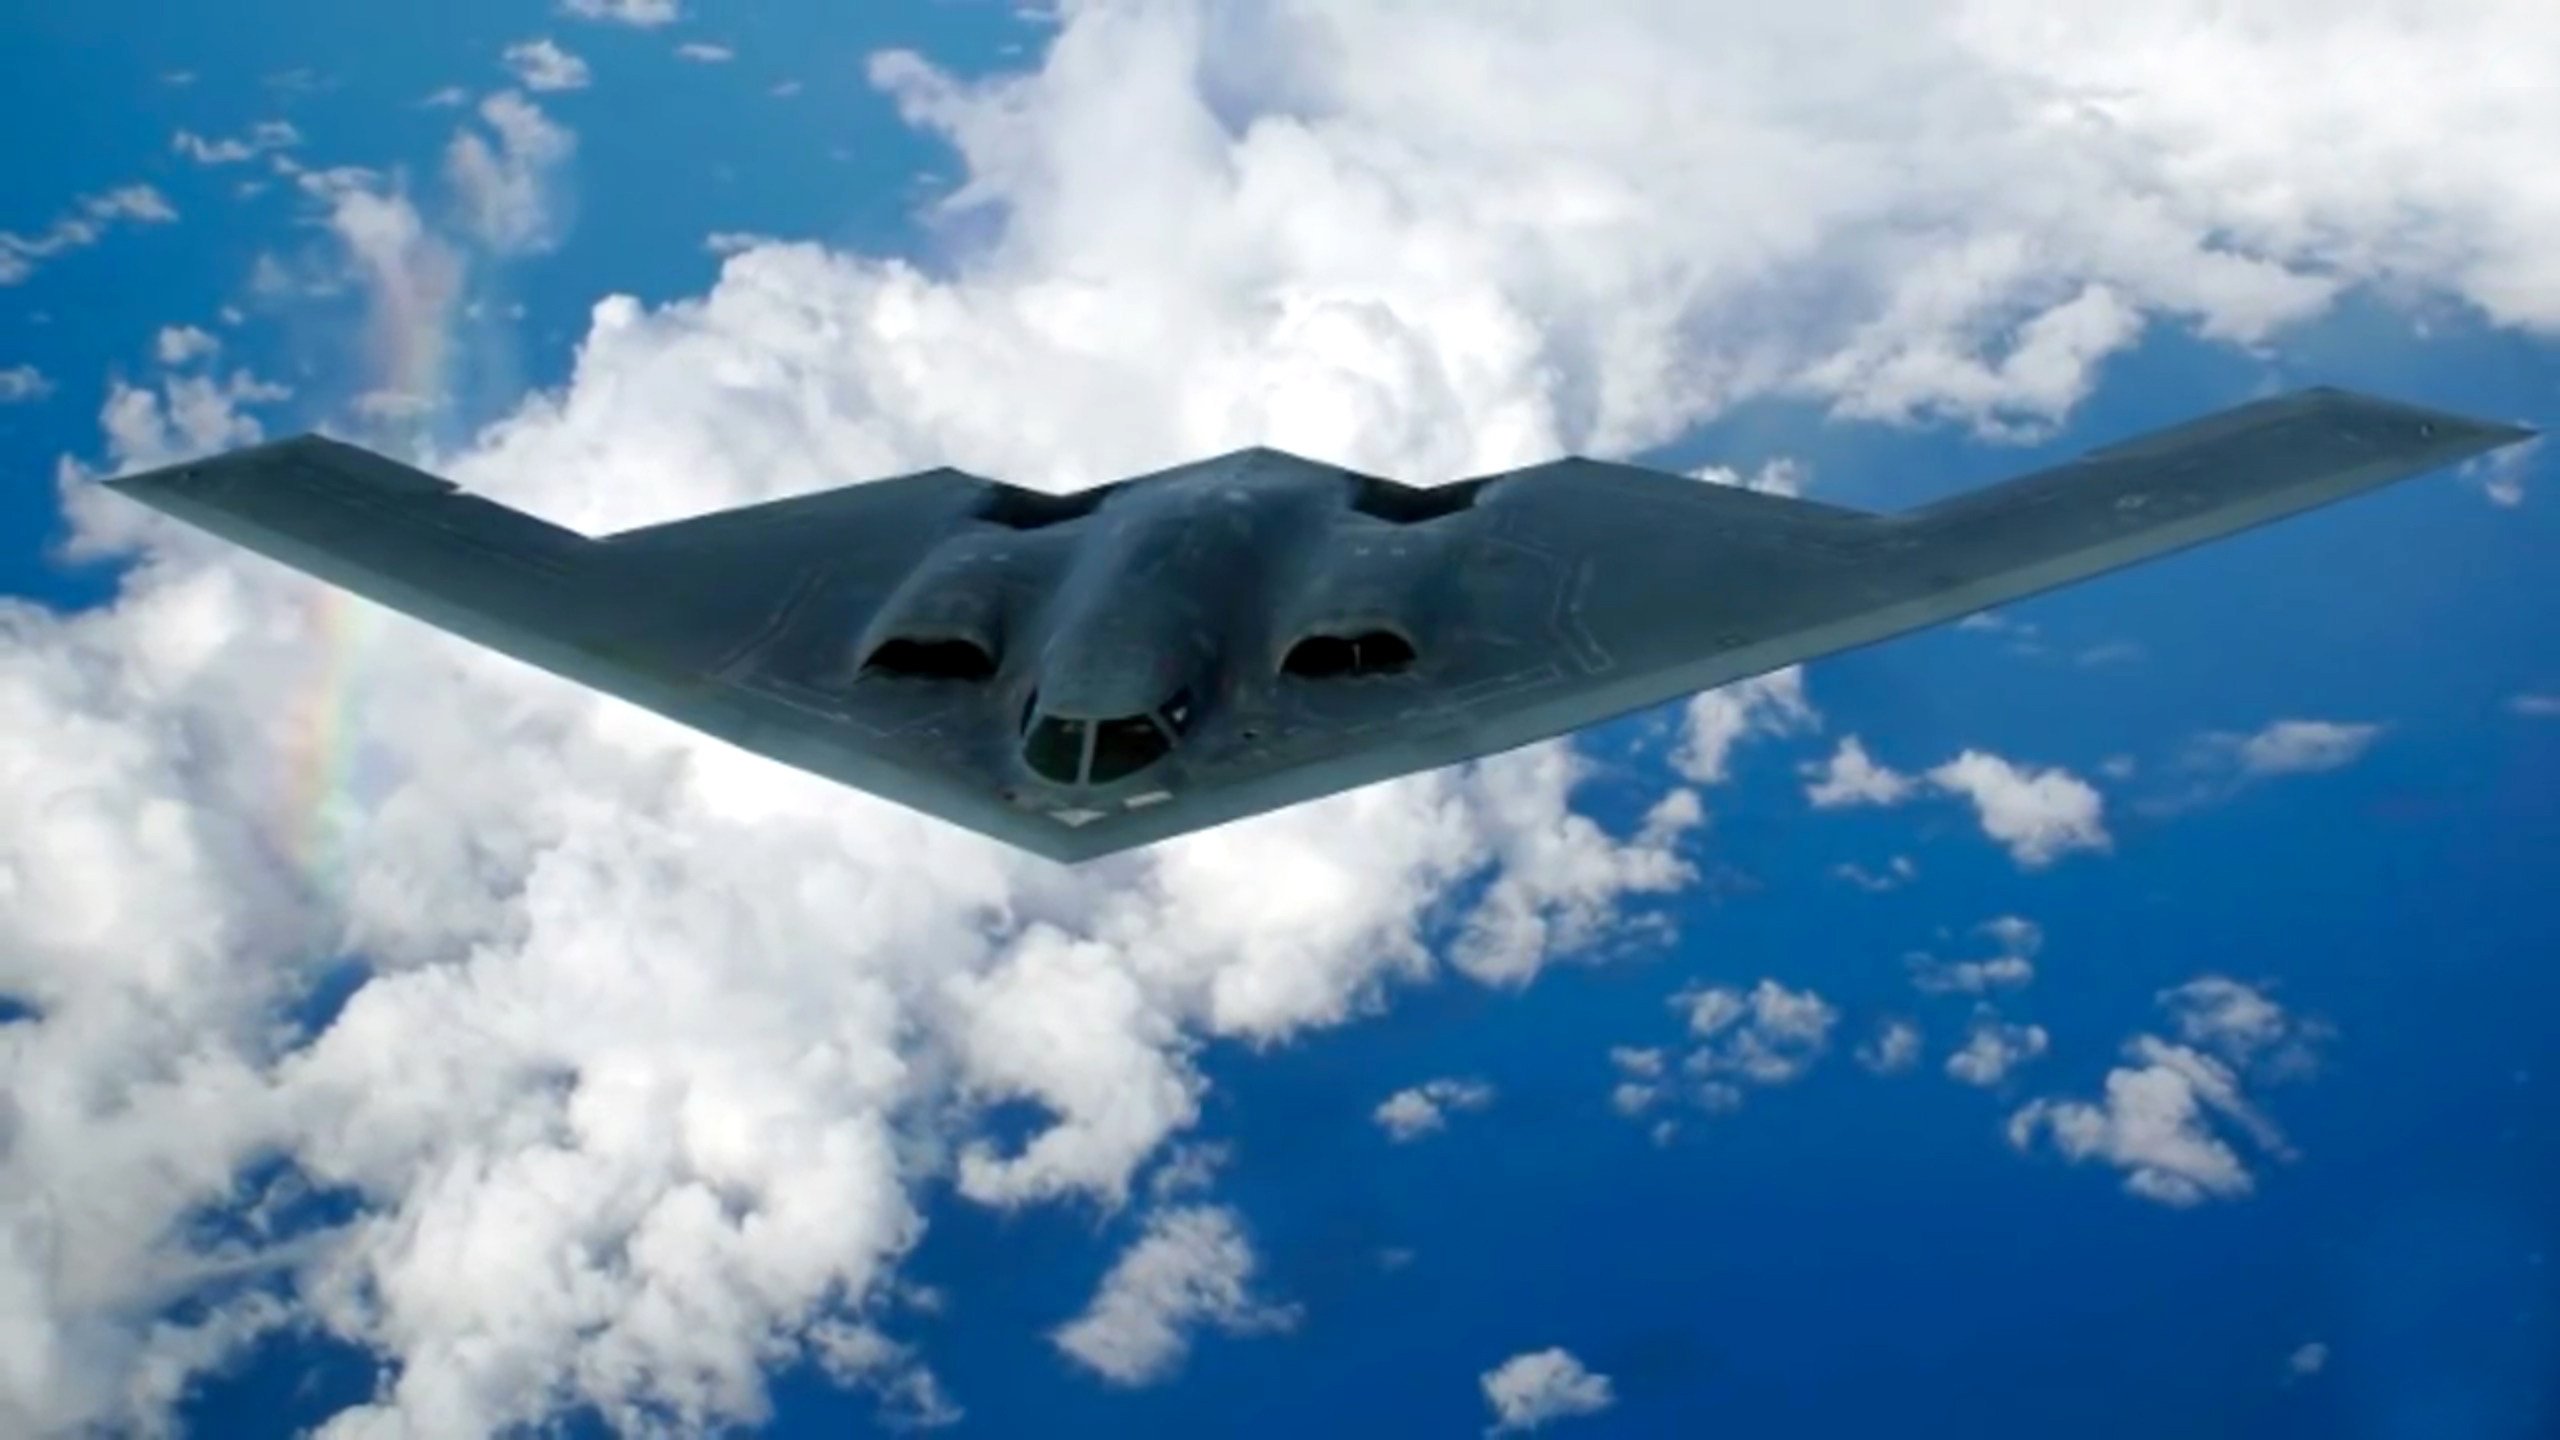 Computer-generated image of the B-21 Raider, a stealth bomber for the United States Air Force. Photo: Handout